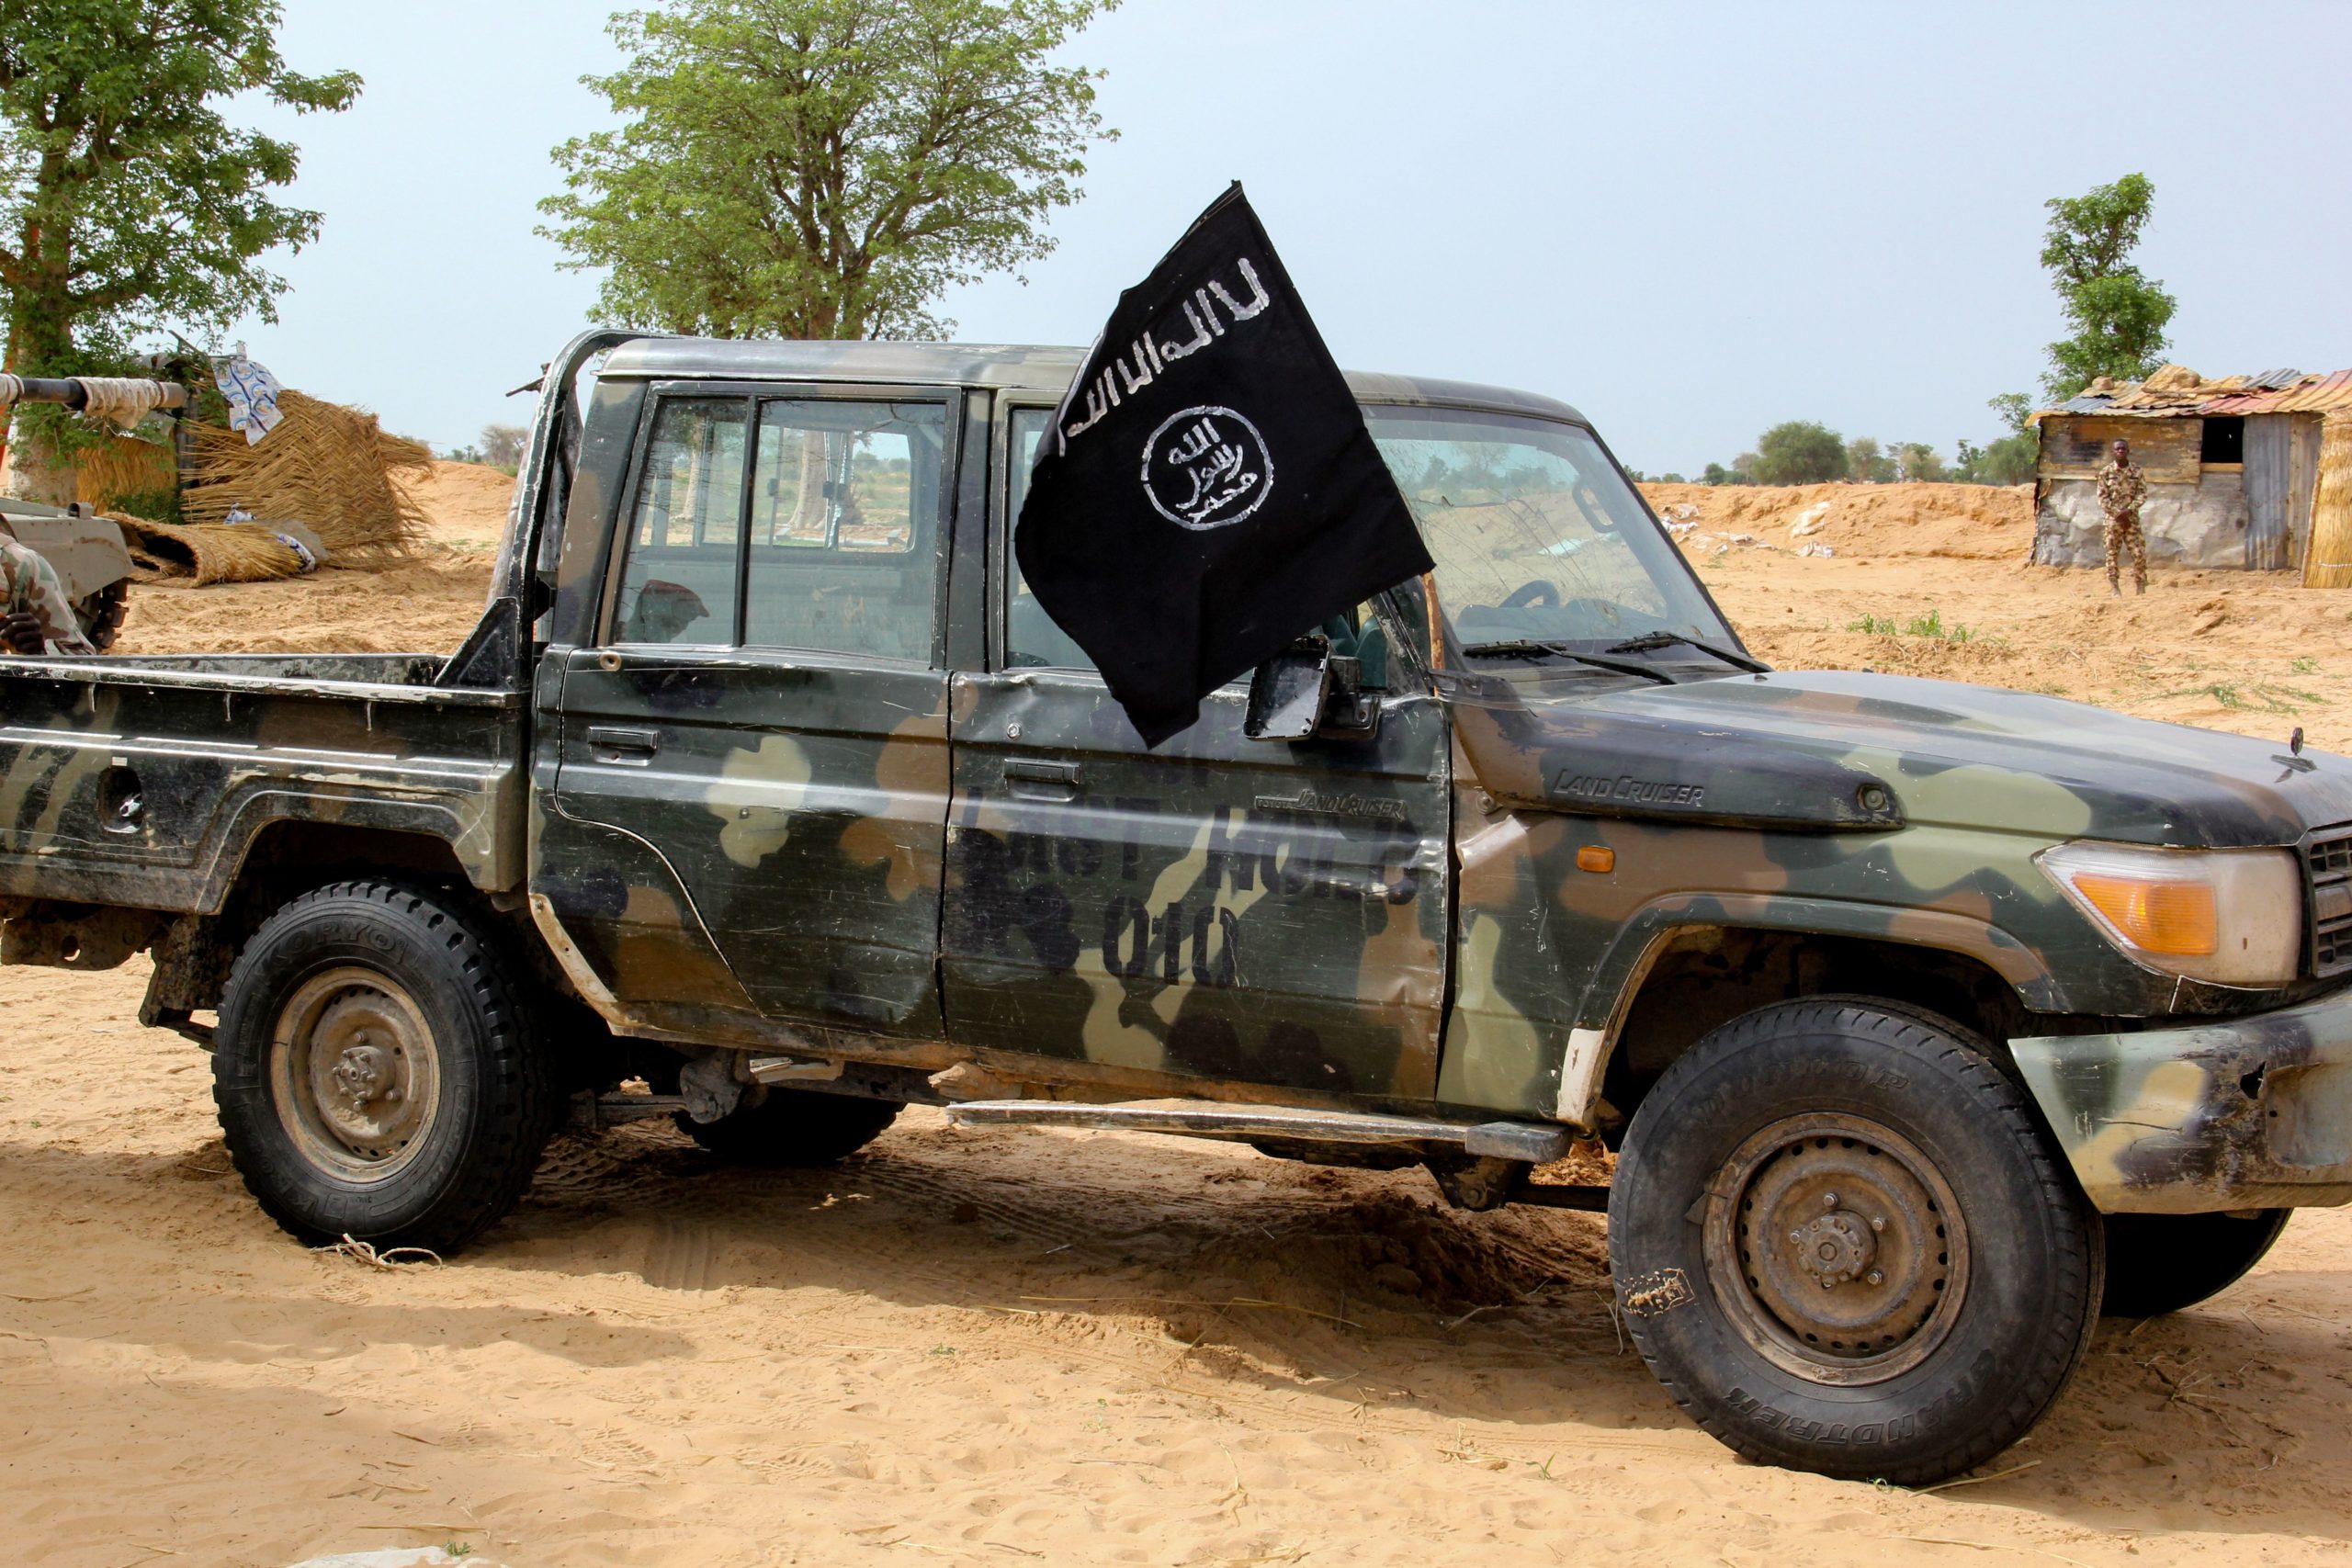 A vehicle allegedly belonging to the Islamic State group in West Africa (ISWAP) is seen in Baga on August 2, 2019. - Intense fighting between a regional force and the Islamic State group in West Africa (ISWAP) has resulted in dozens of deaths, including at least 25 soldiers and more than 40 jihadists, in northeastern Nigeria. ISWAP broke away from Boko Haram in 2016 in part due to its rejection of indiscriminate attacks on civilians. Last year the group witnessed a reported takeover by more hardline fighters who sidelined its leader and executed his deputy. The IS-affiliate has since July 2018 ratcheted up a campaign of attacks against military targets. 